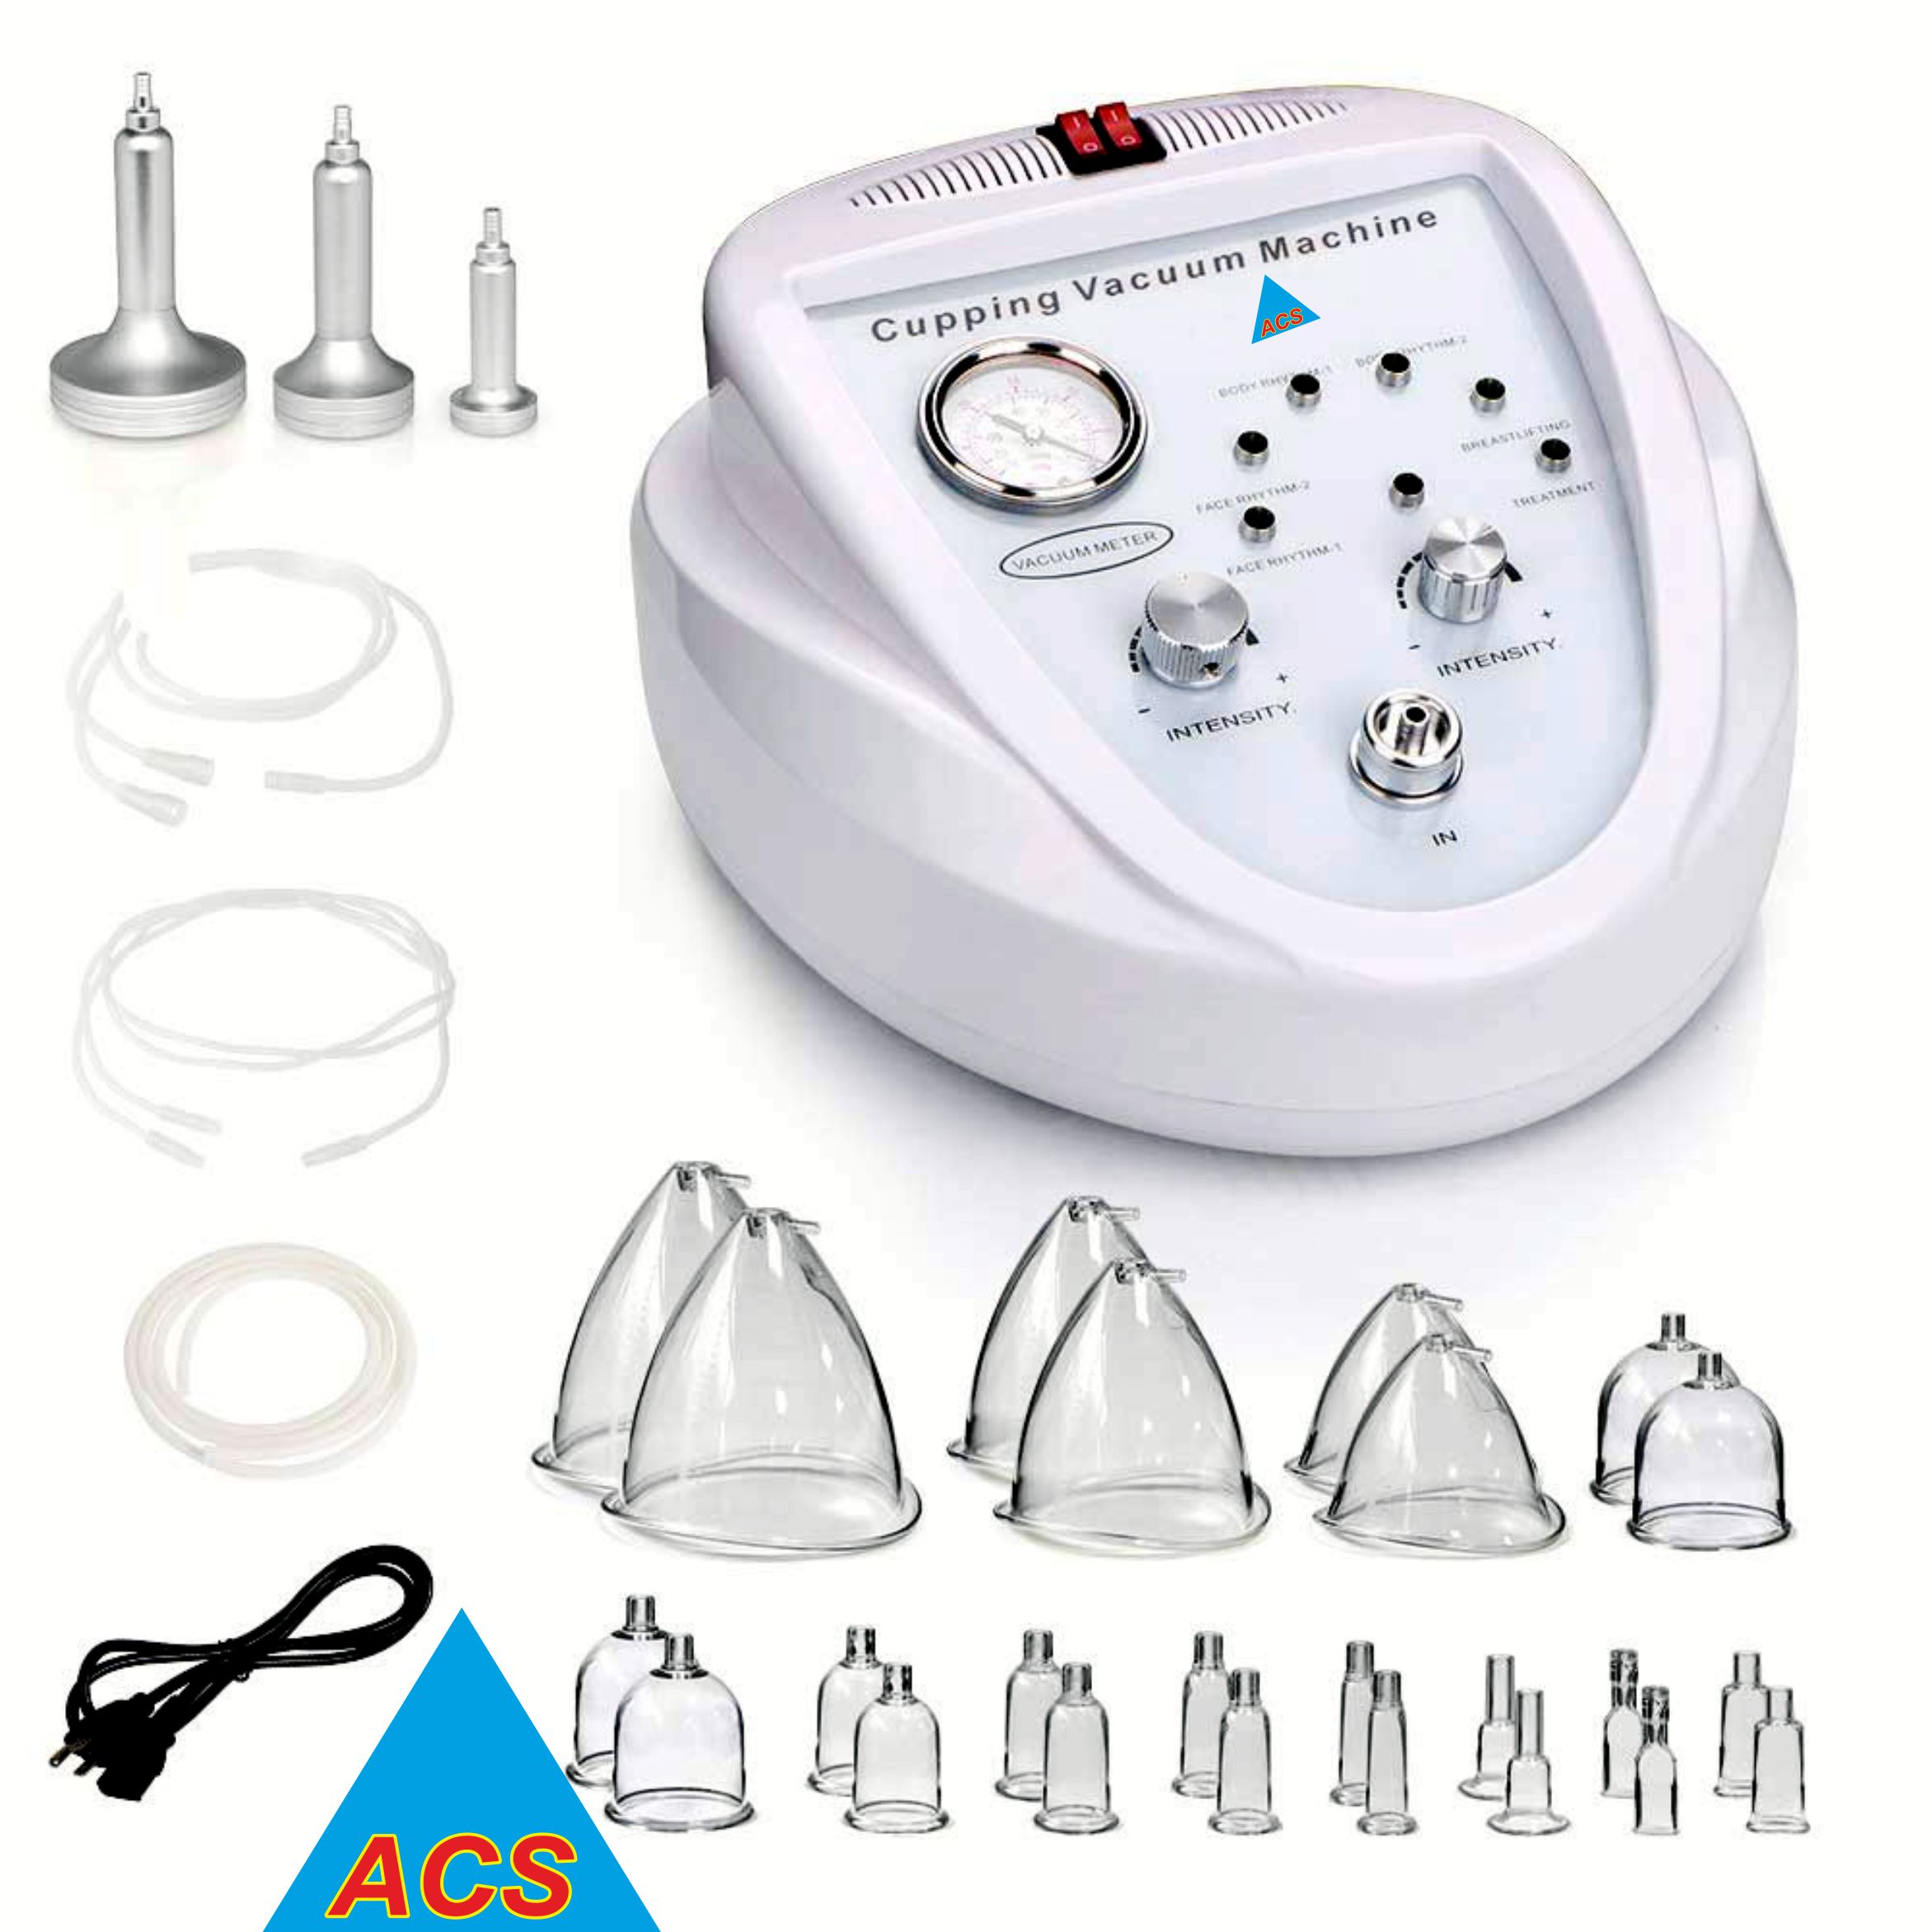 ACS Vaccum Cupping Therapy Machine  - CL-0 